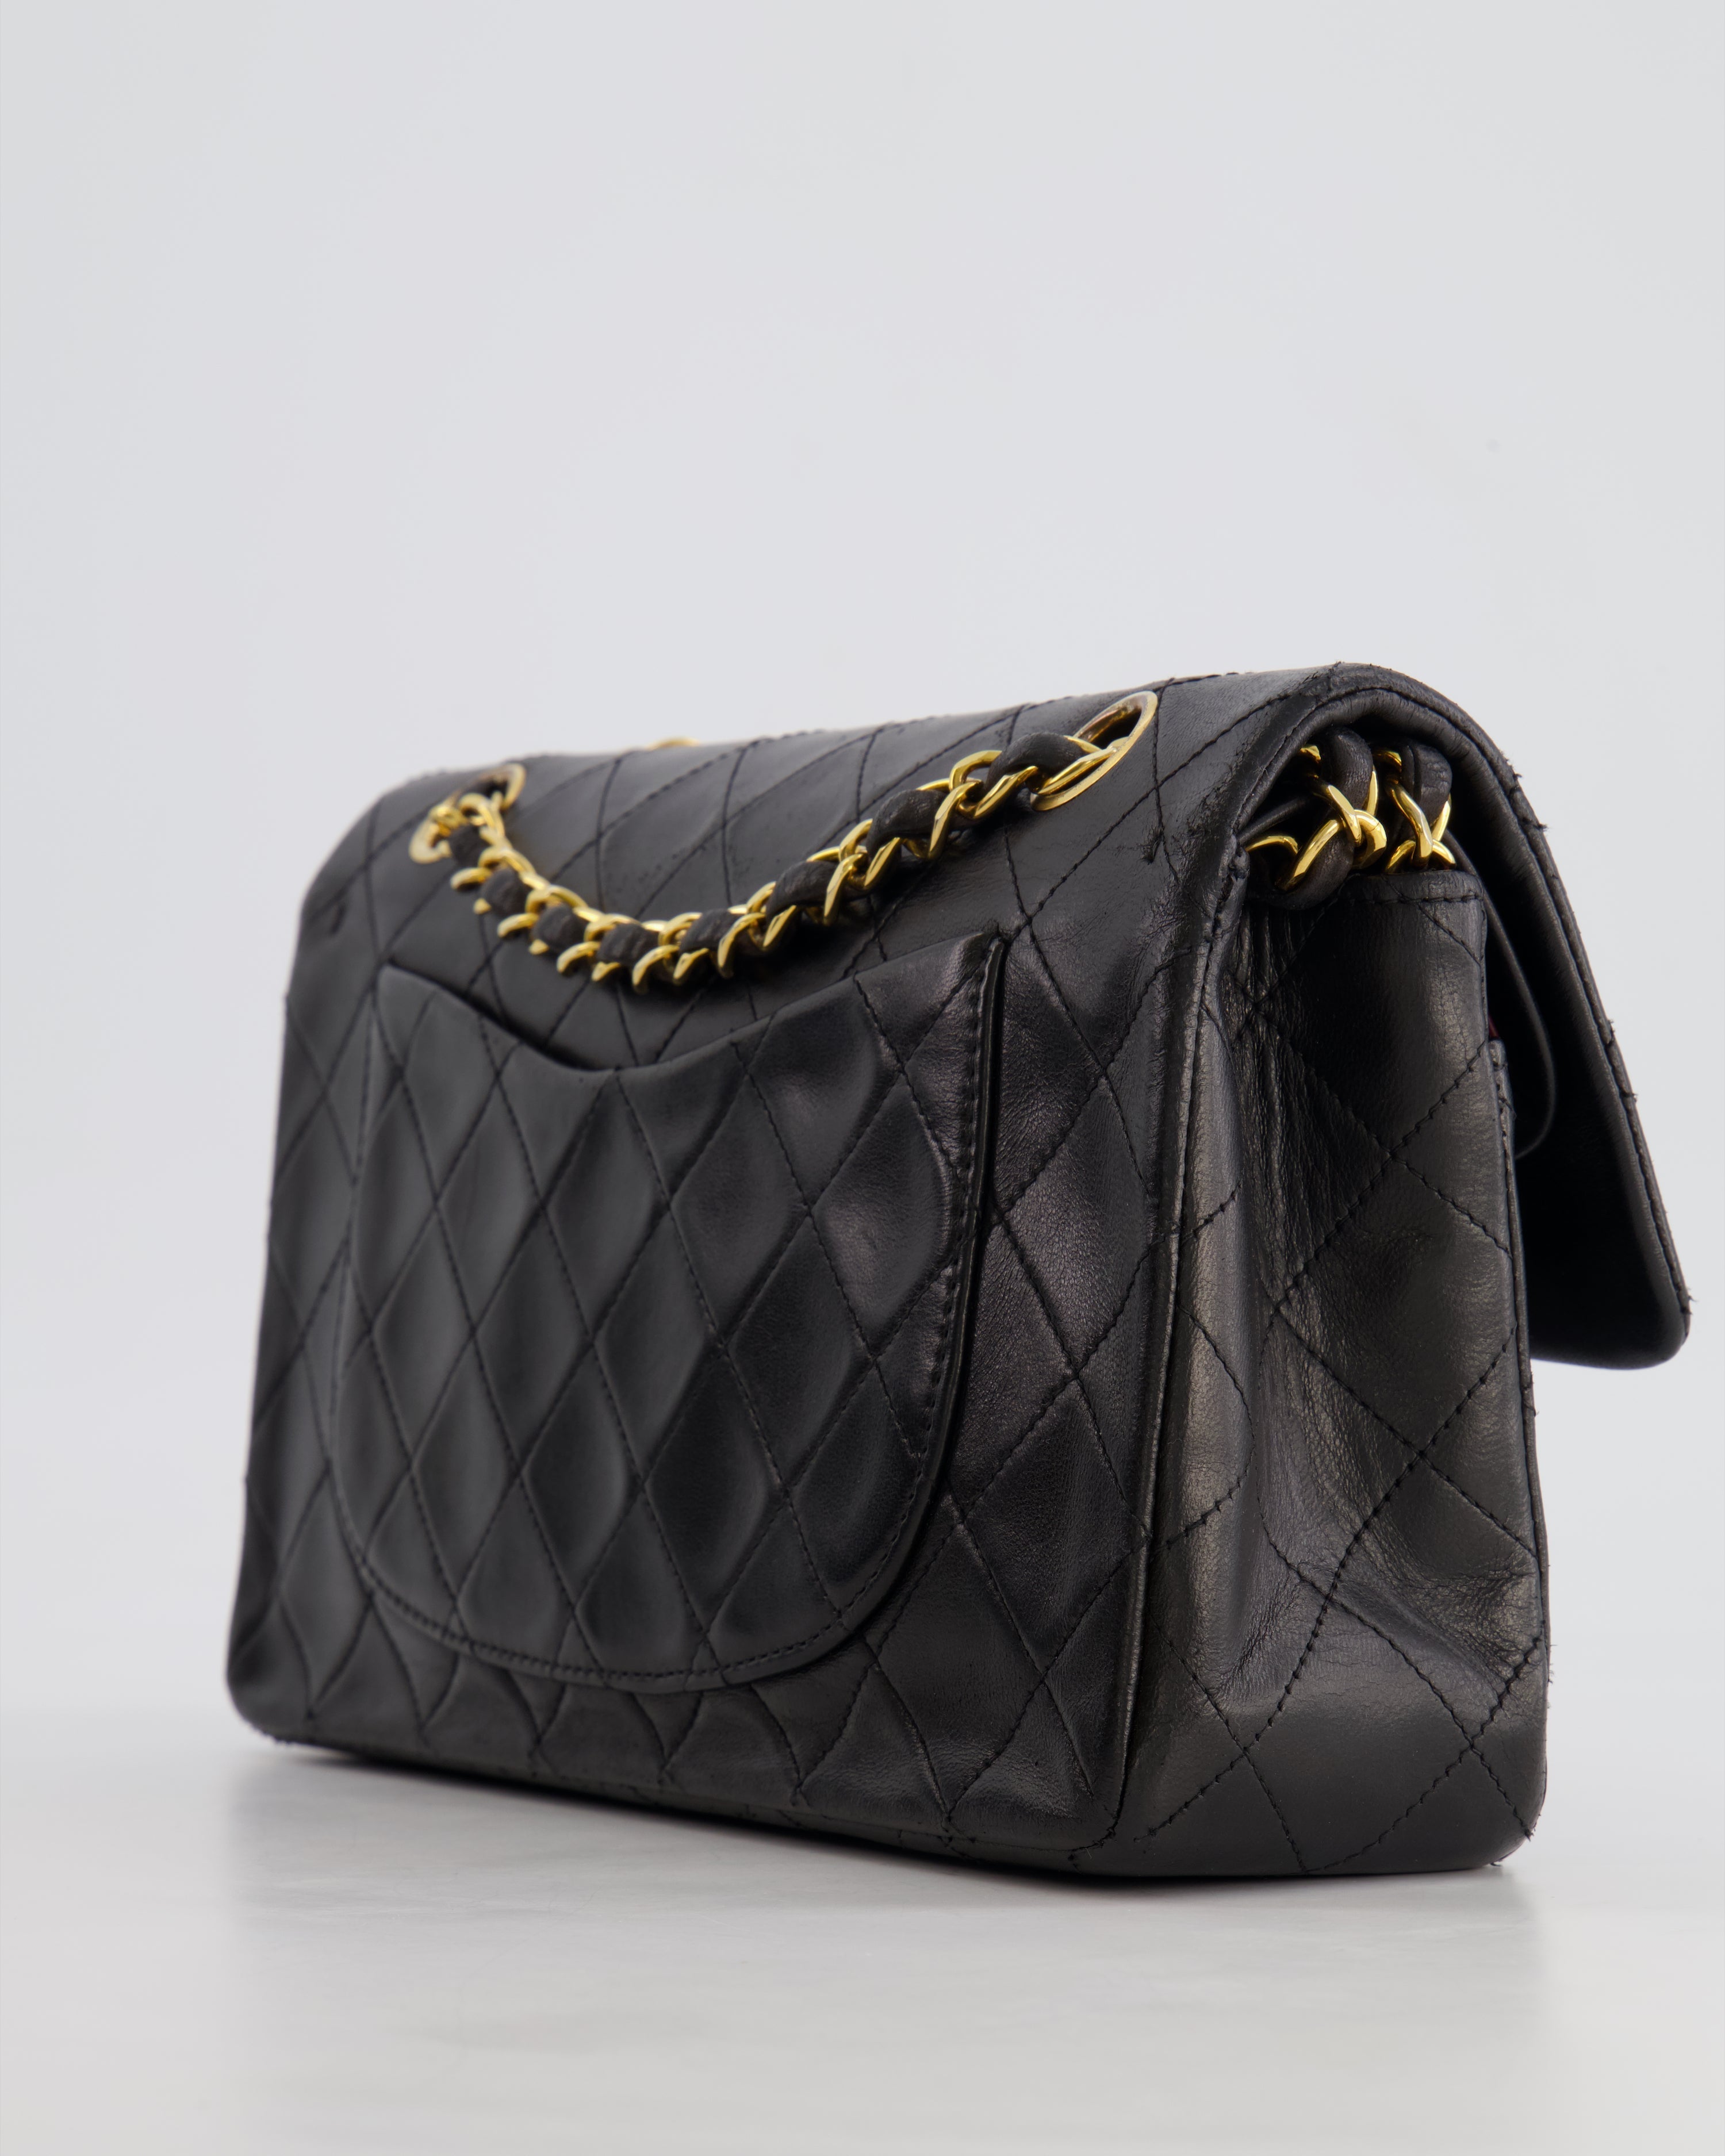 Chanel Black Small Vintage Double Flap Bag in Lambskin Leather with 24K Gold Hardware